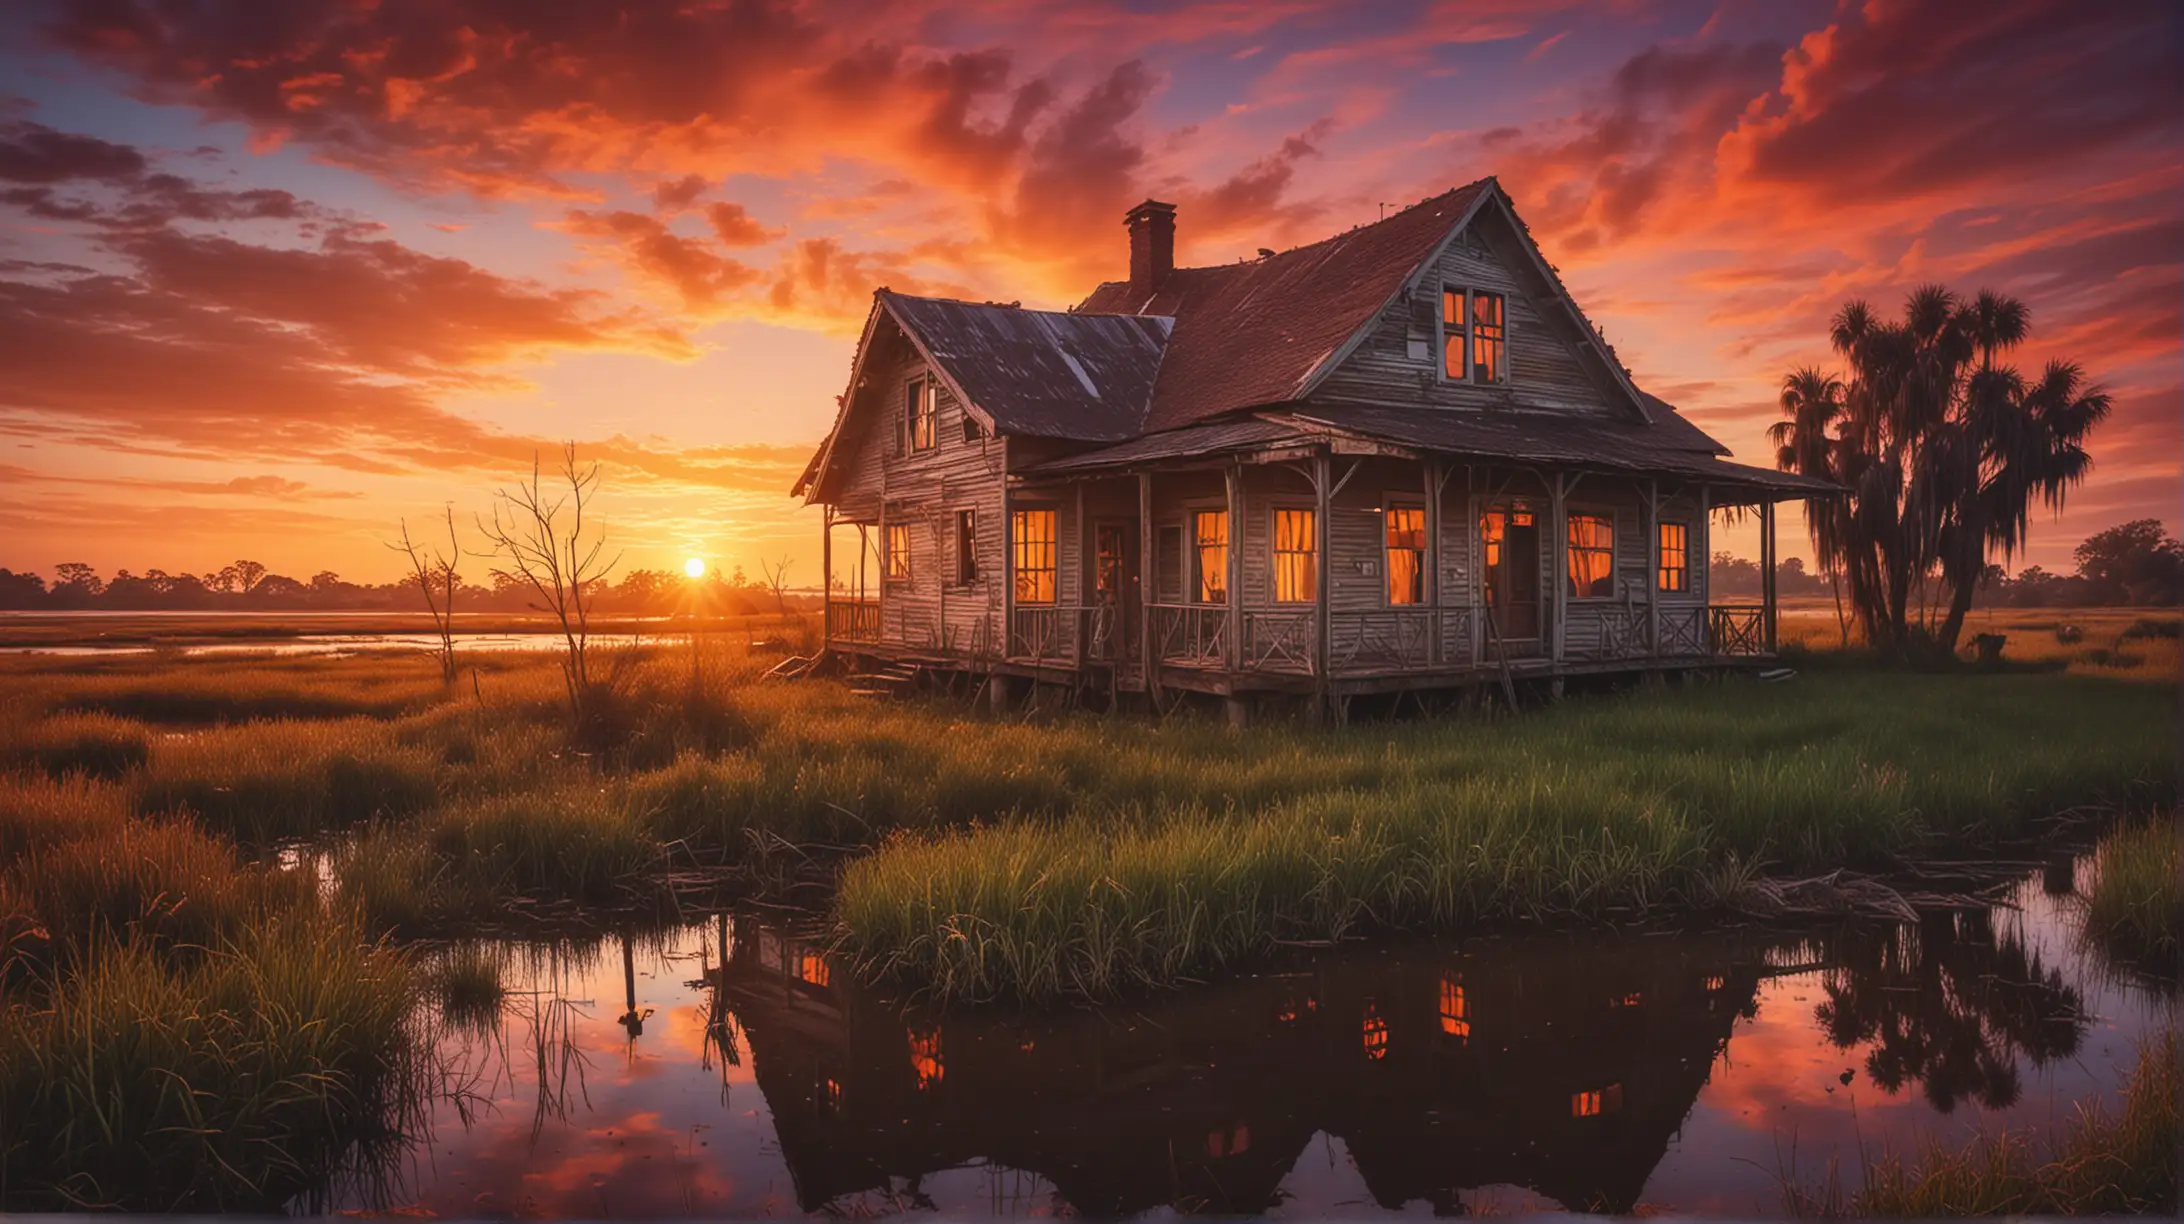 Psychedelic Sunset Over Old Wetlands House